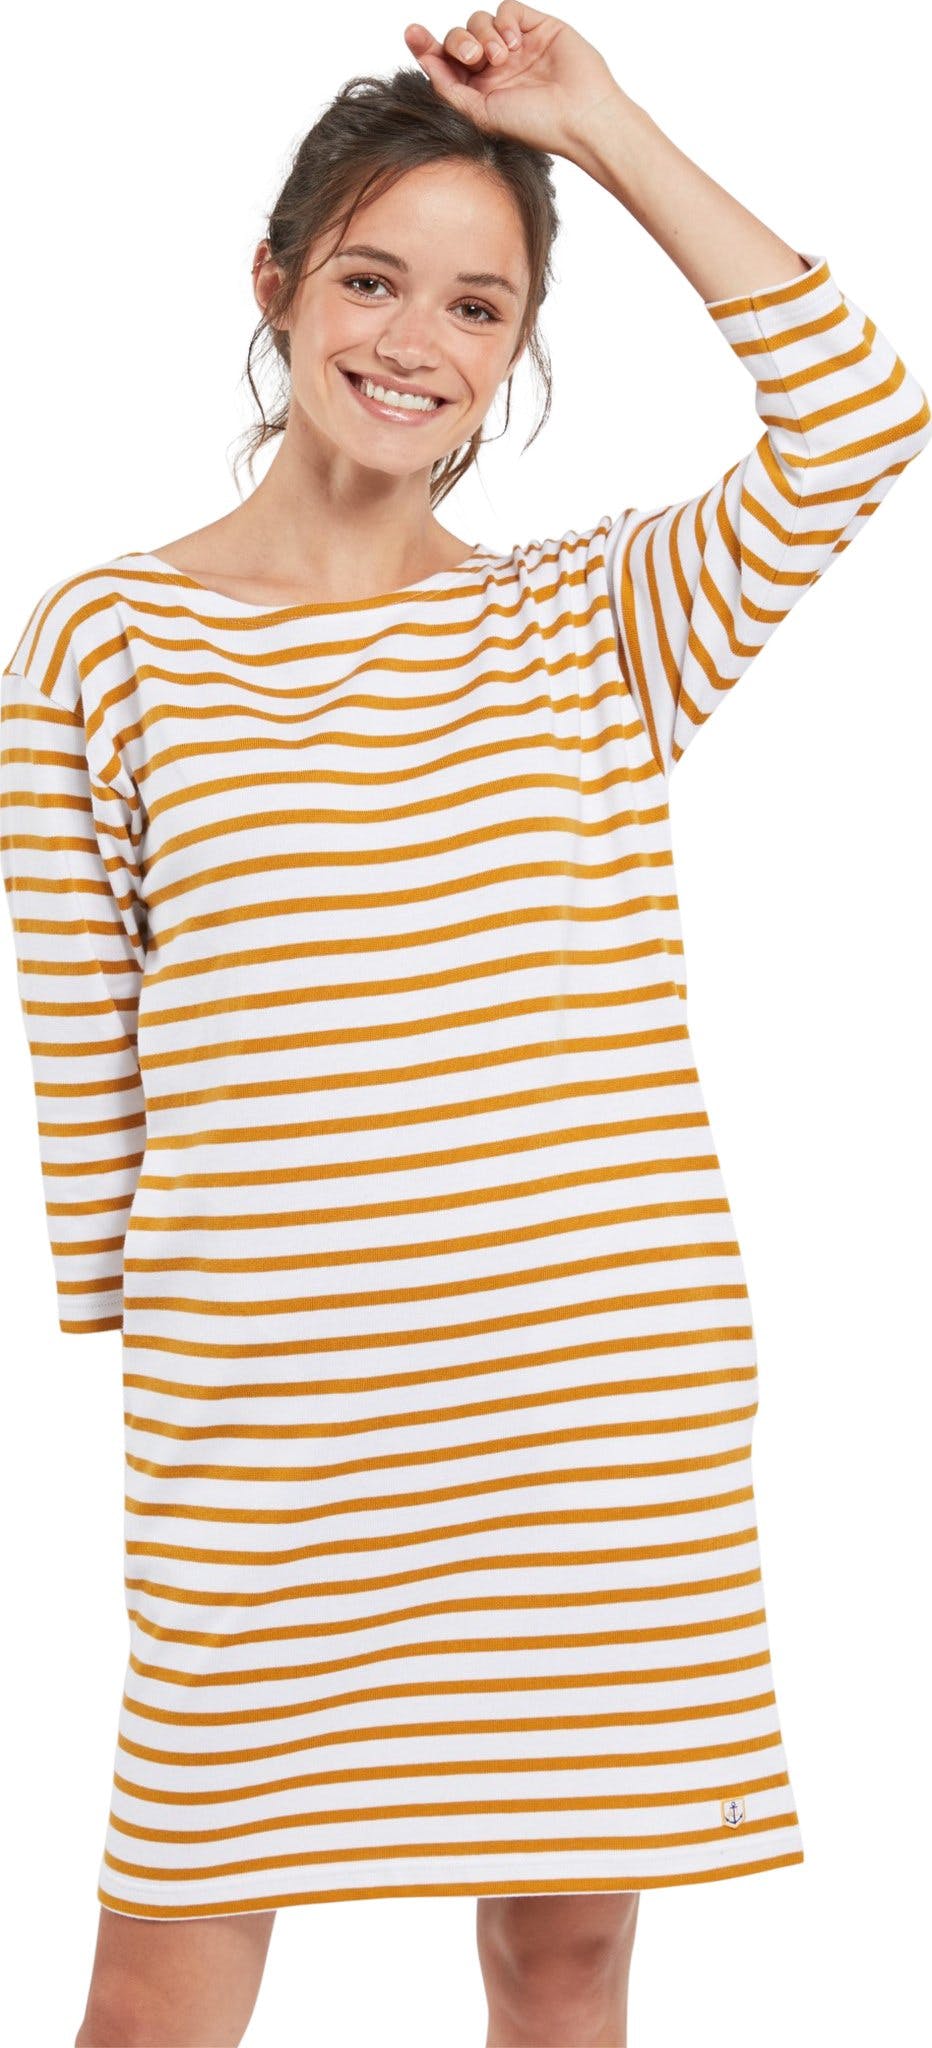 Product image for Héritage Striped Dress - Women's